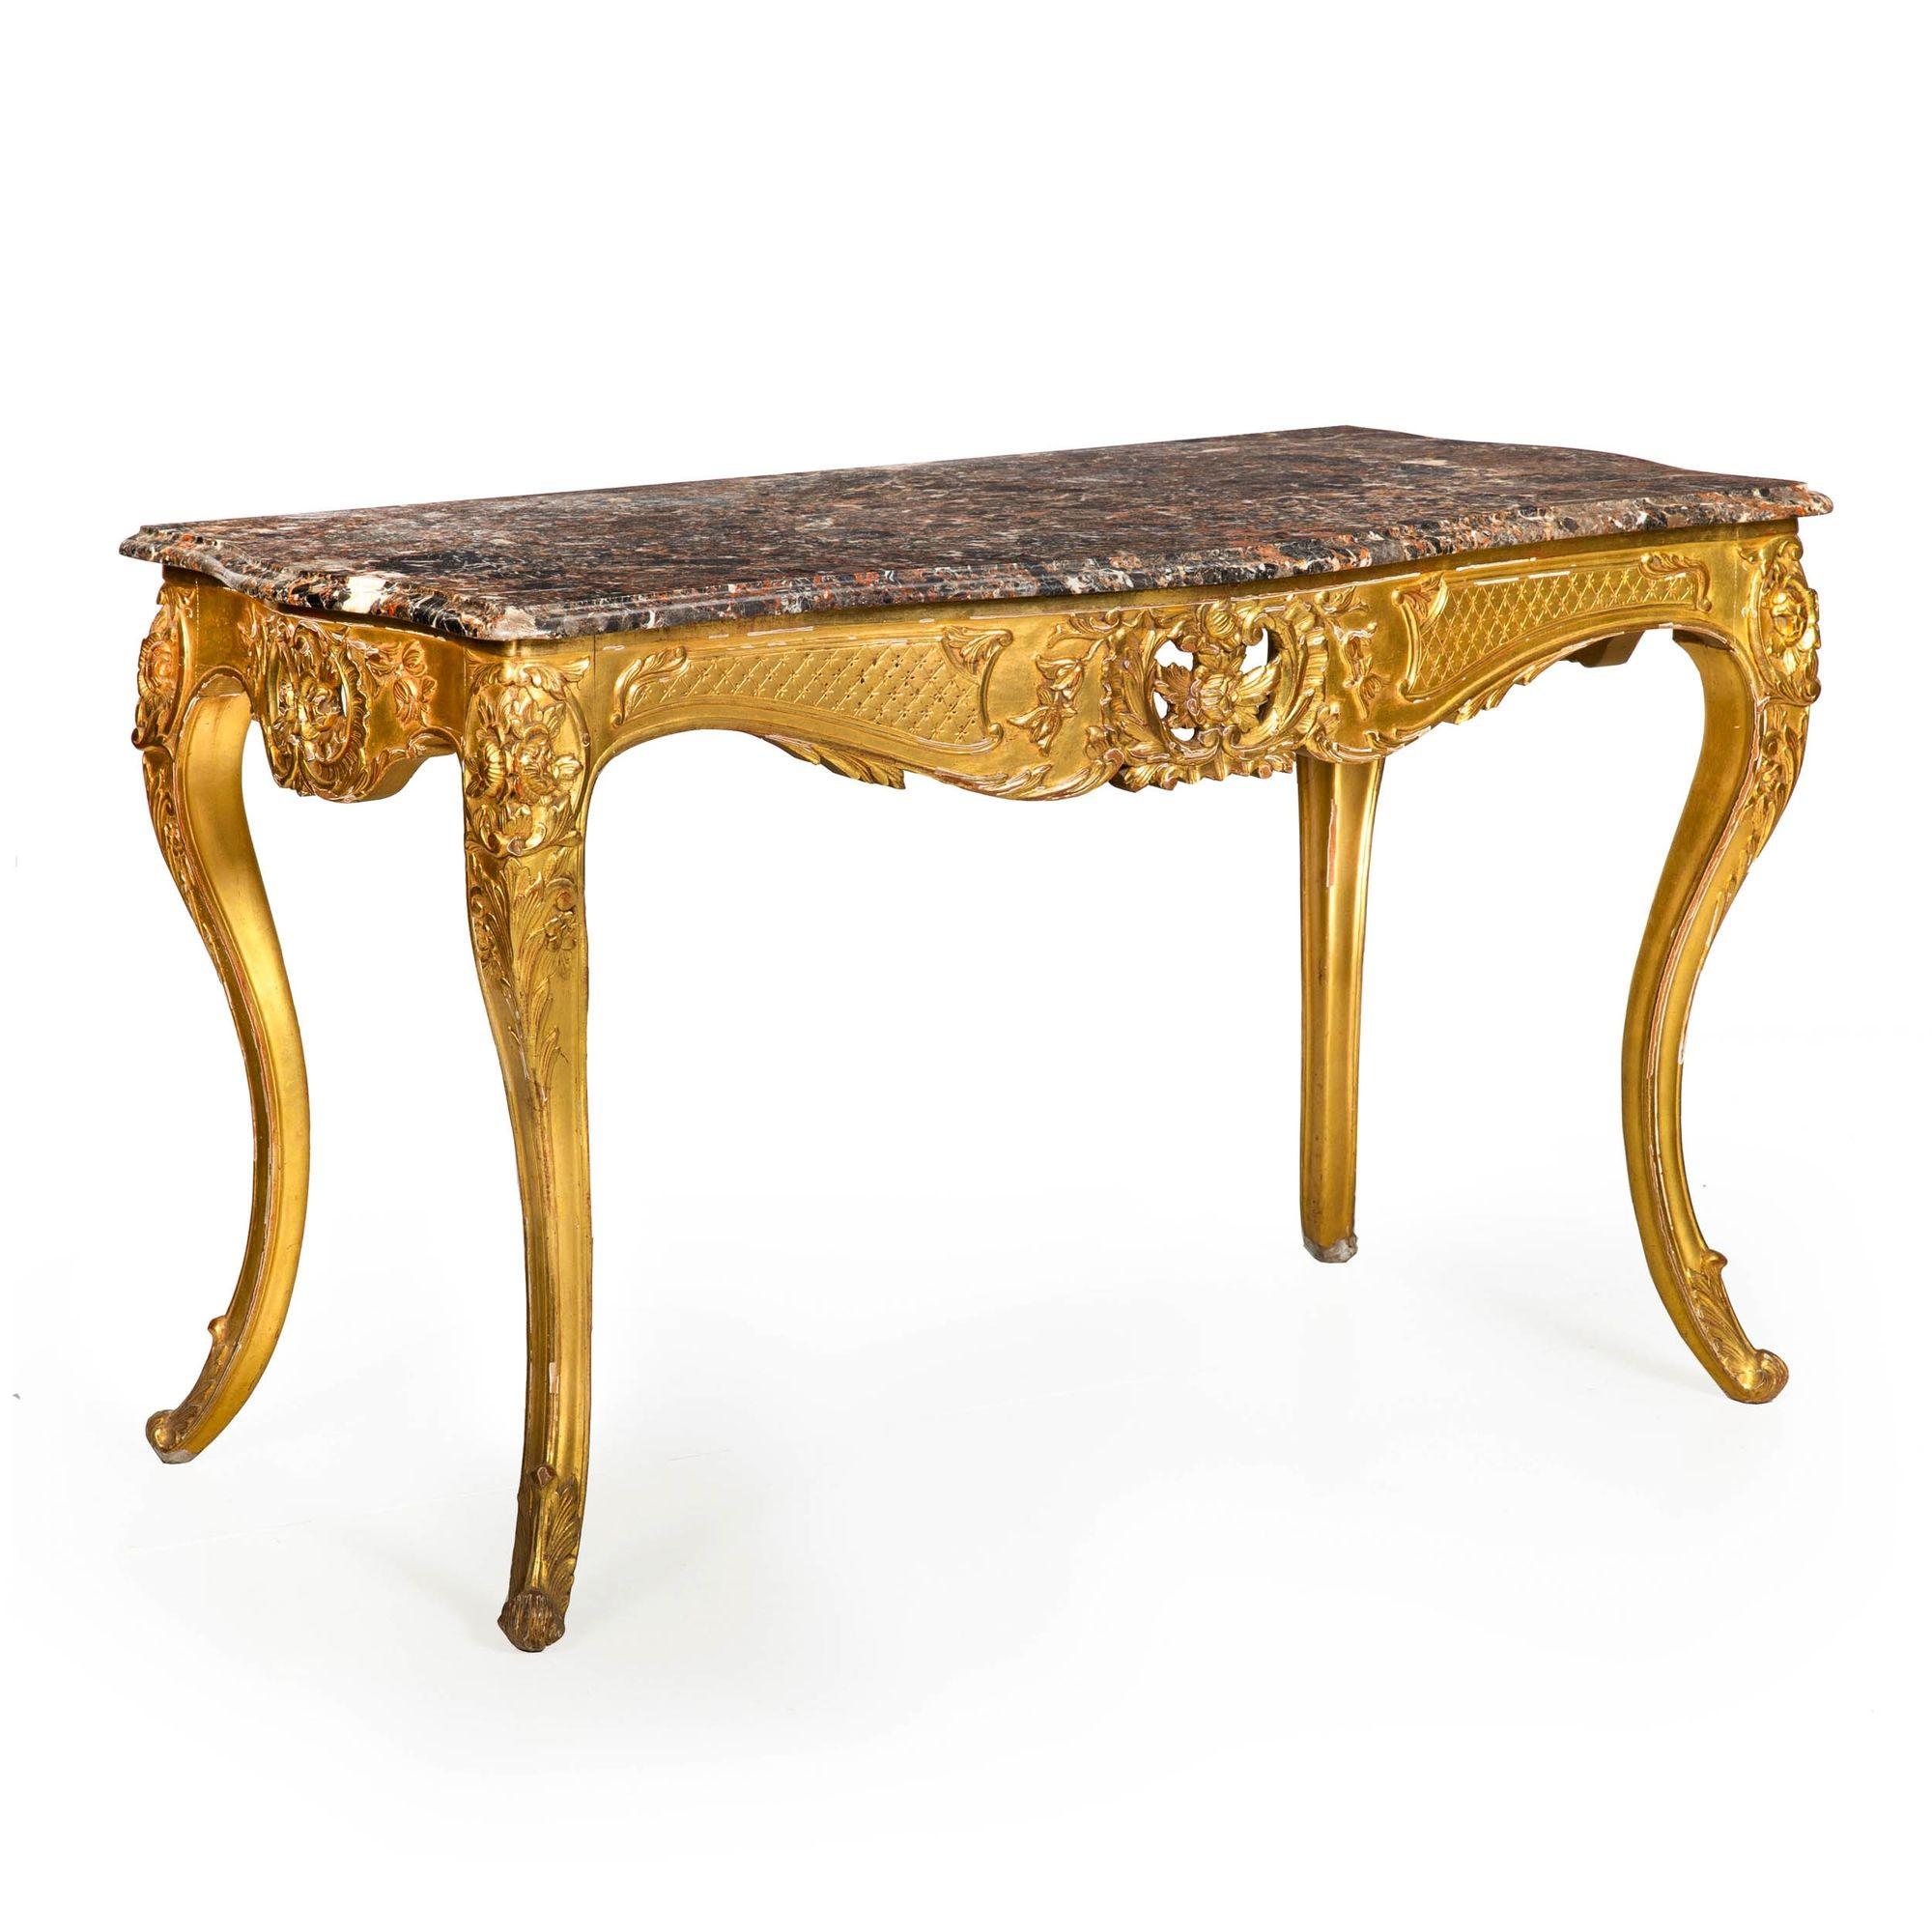 LOUIS XV STYLE CARVED GILTWOOD AND MARBLE-TOP CONSOLE TABLE
France, circa 20th century  corners of frame stamped 